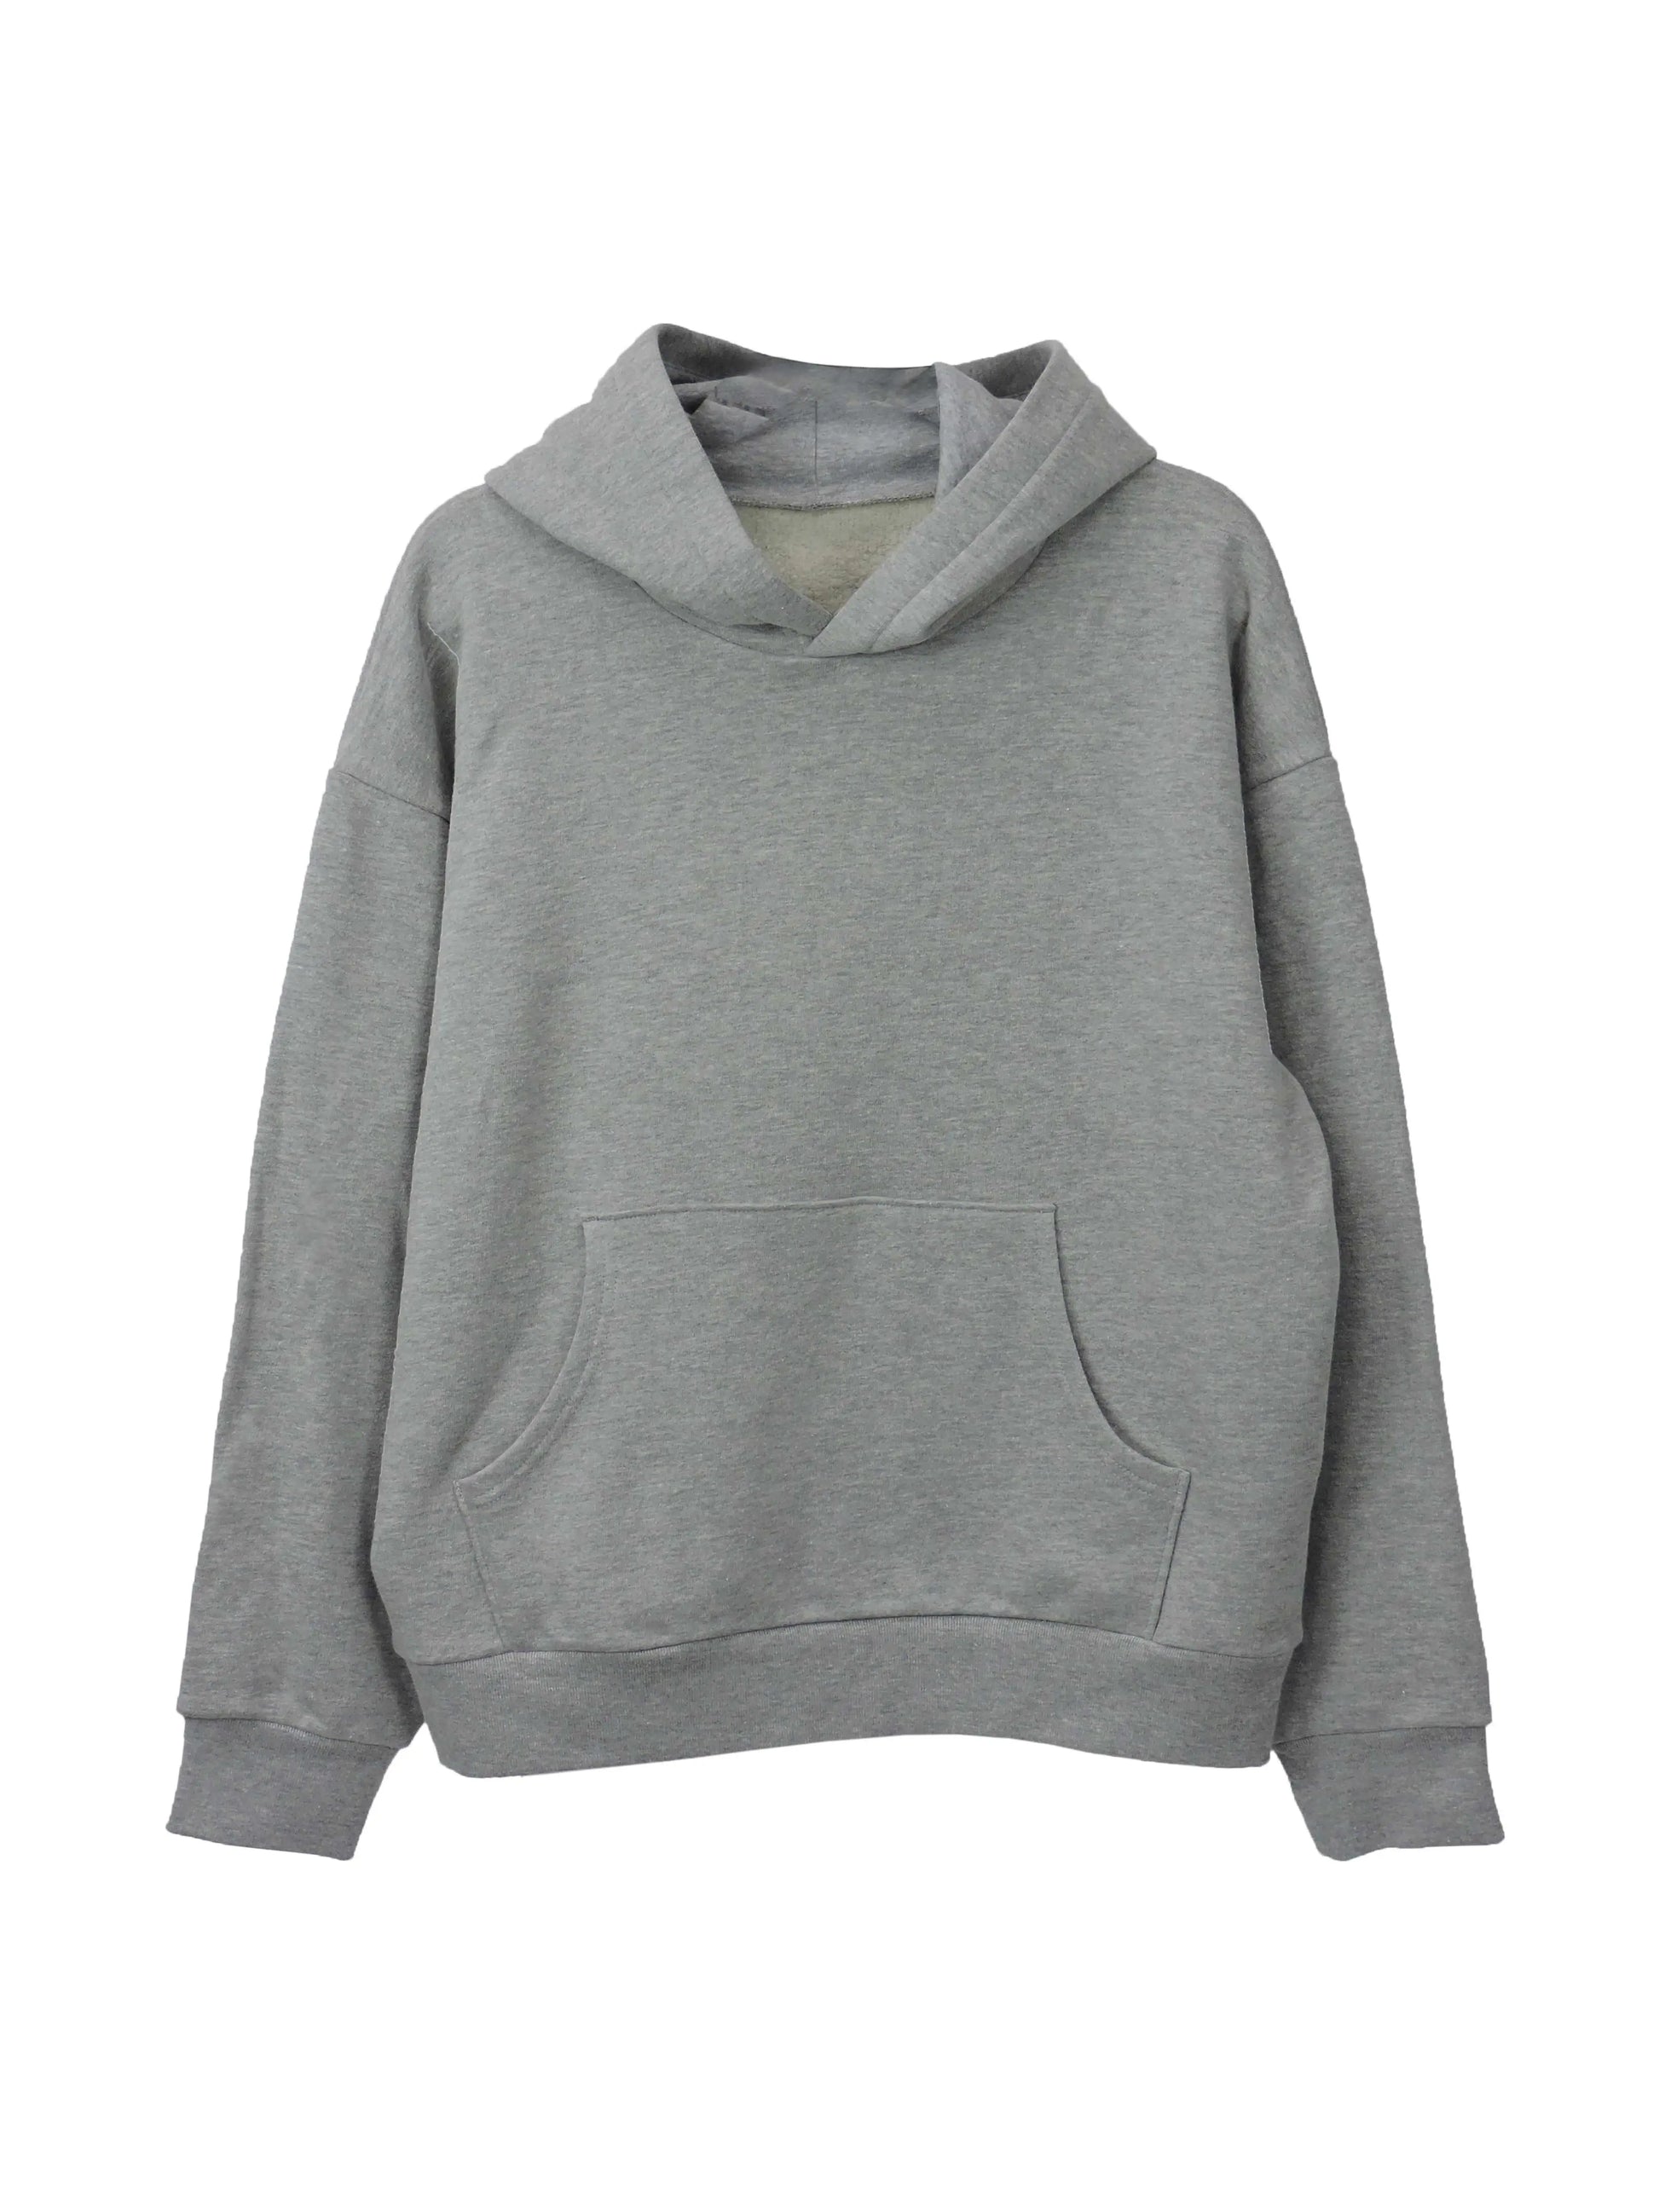 100% Heavy Cotton Womens Hoodie Pullover Sweatshirt Made in Canada